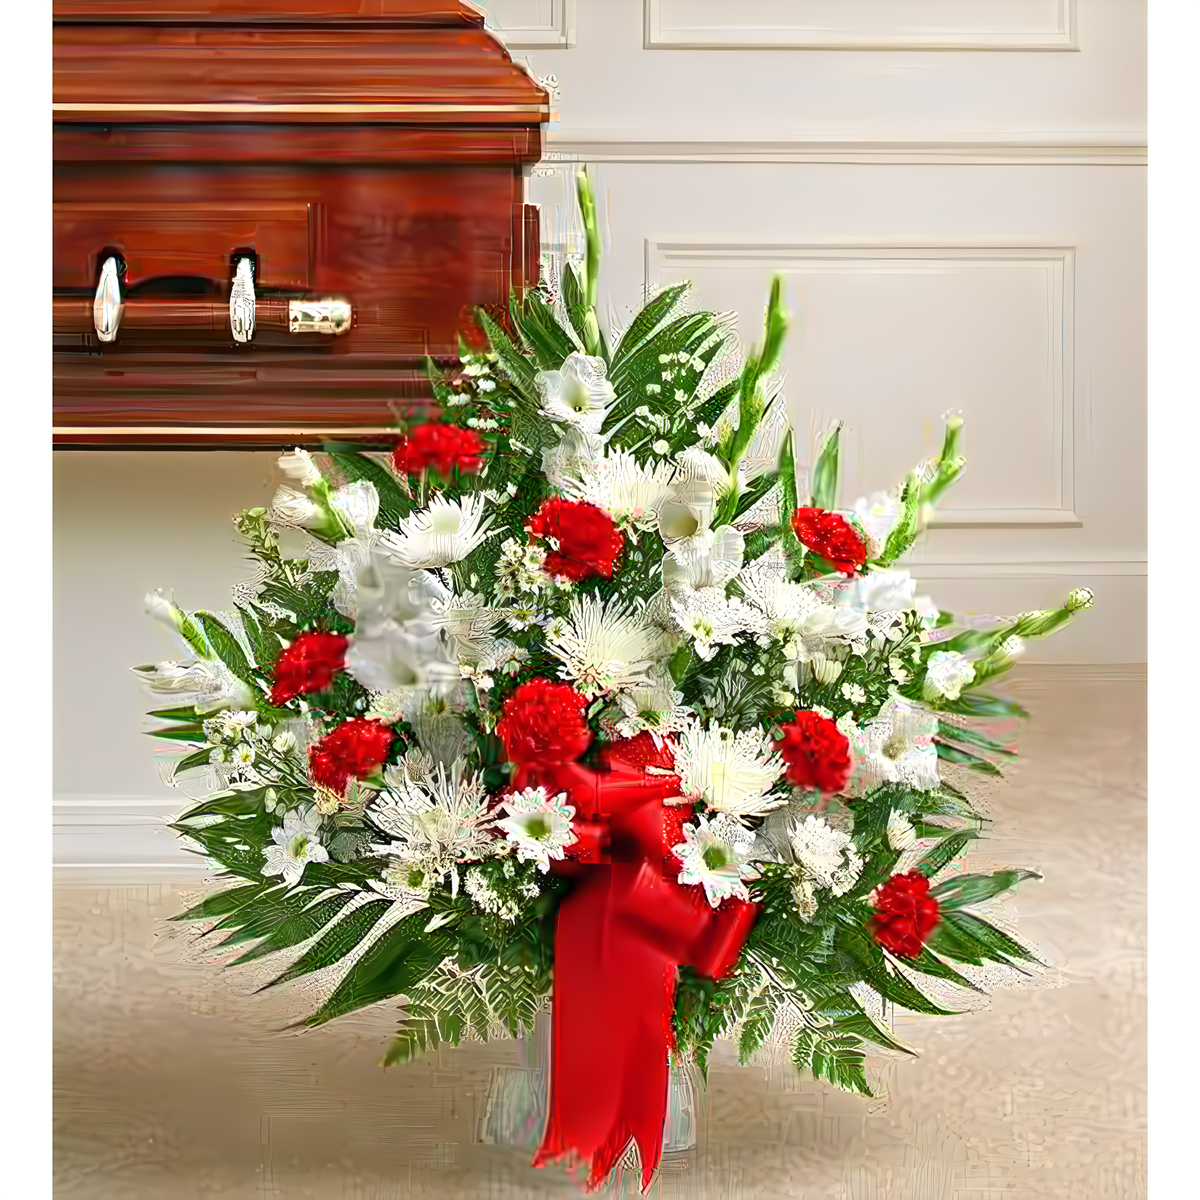 Manhattan Flower Delivery - Tribute Red &amp; White Floor Basket Arrangement - Funeral &gt; For the Service